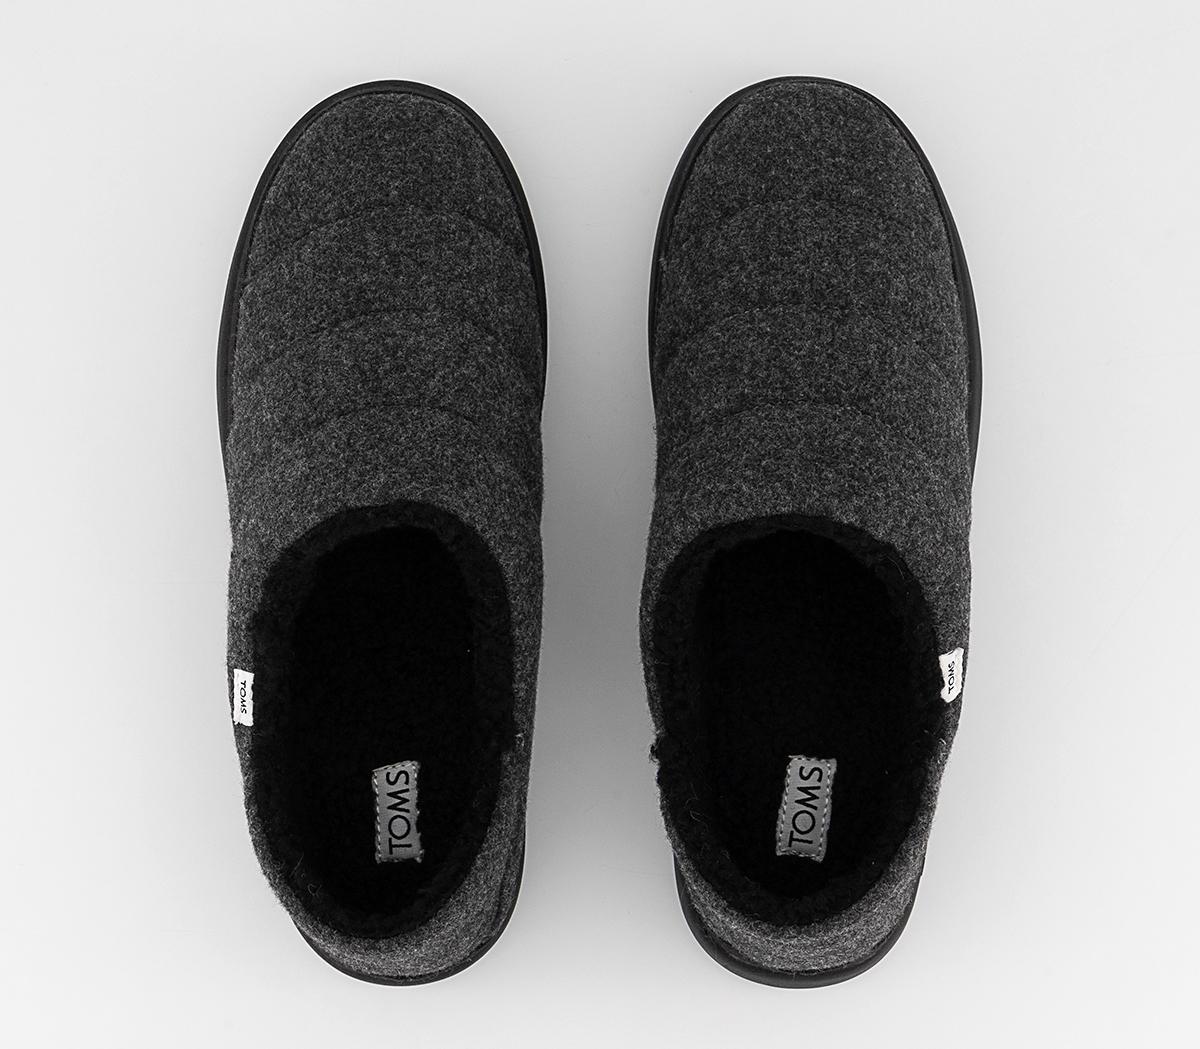 TOMS Ezra Slippers Black - Flat Shoes for Women